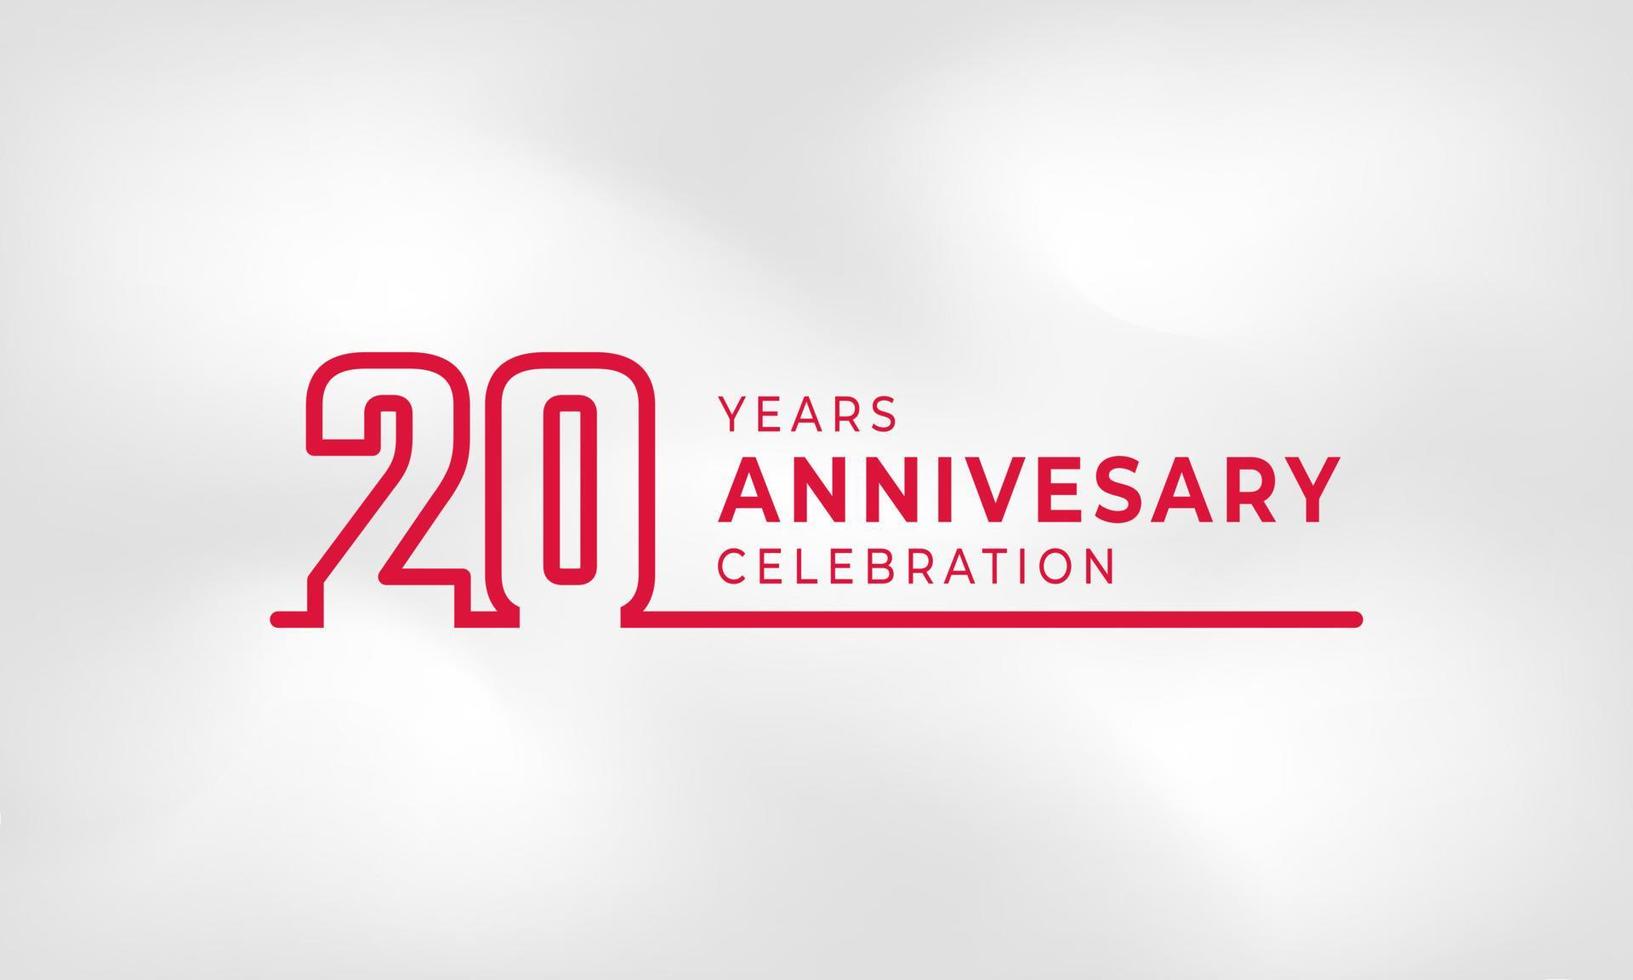 20 Year Anniversary Celebration Linked Logotype Outline Number Red Color for Celebration Event, Wedding, Greeting card, and Invitation Isolated on White Texture Background vector